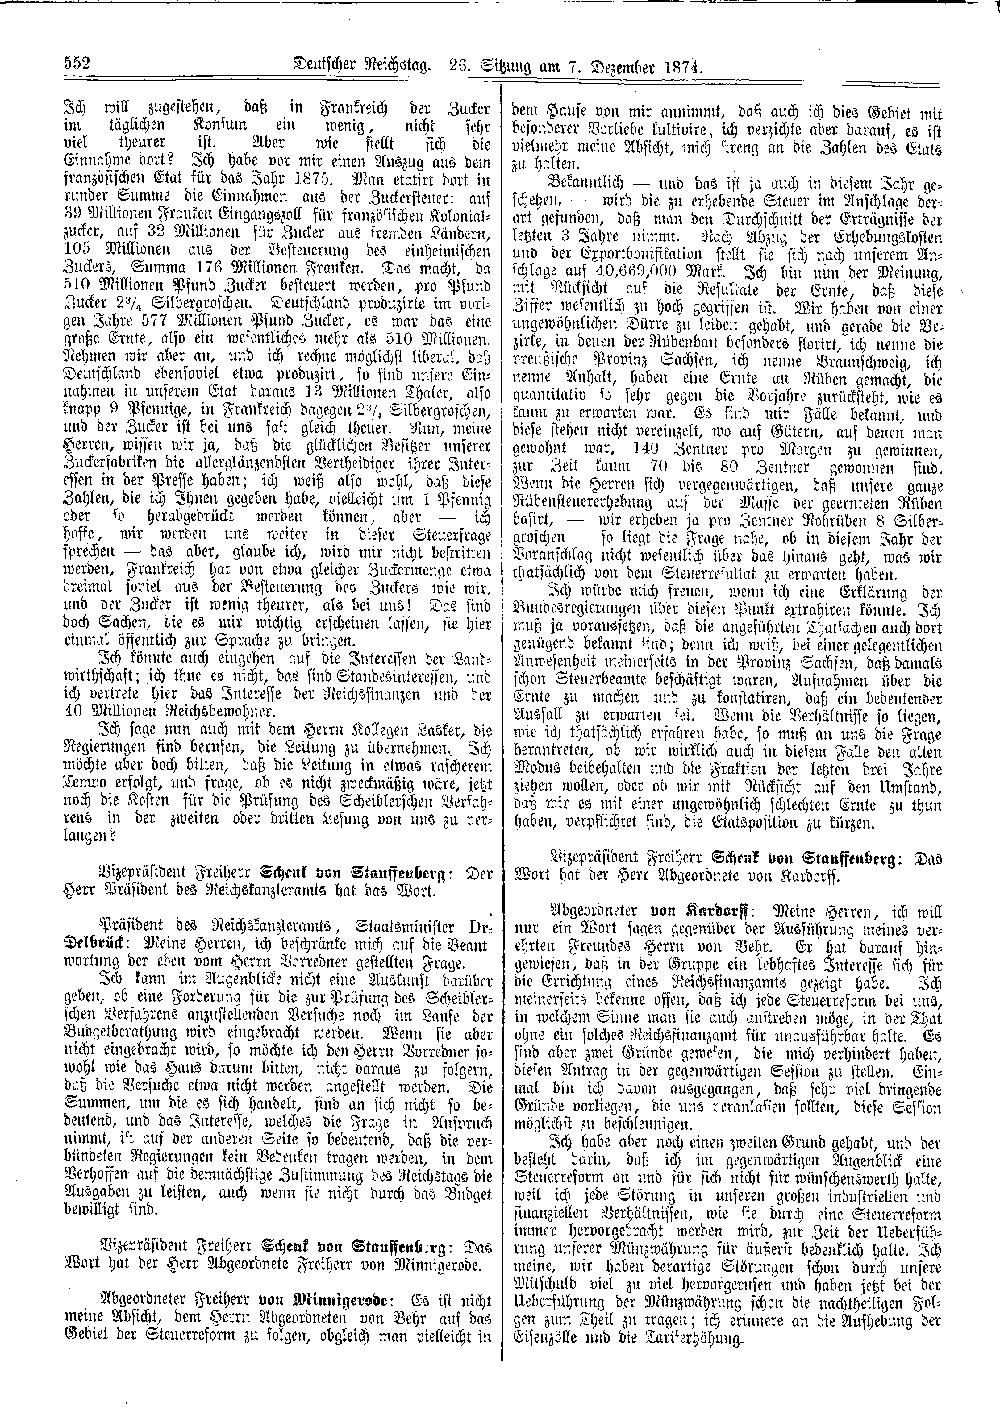 Scan of page 552